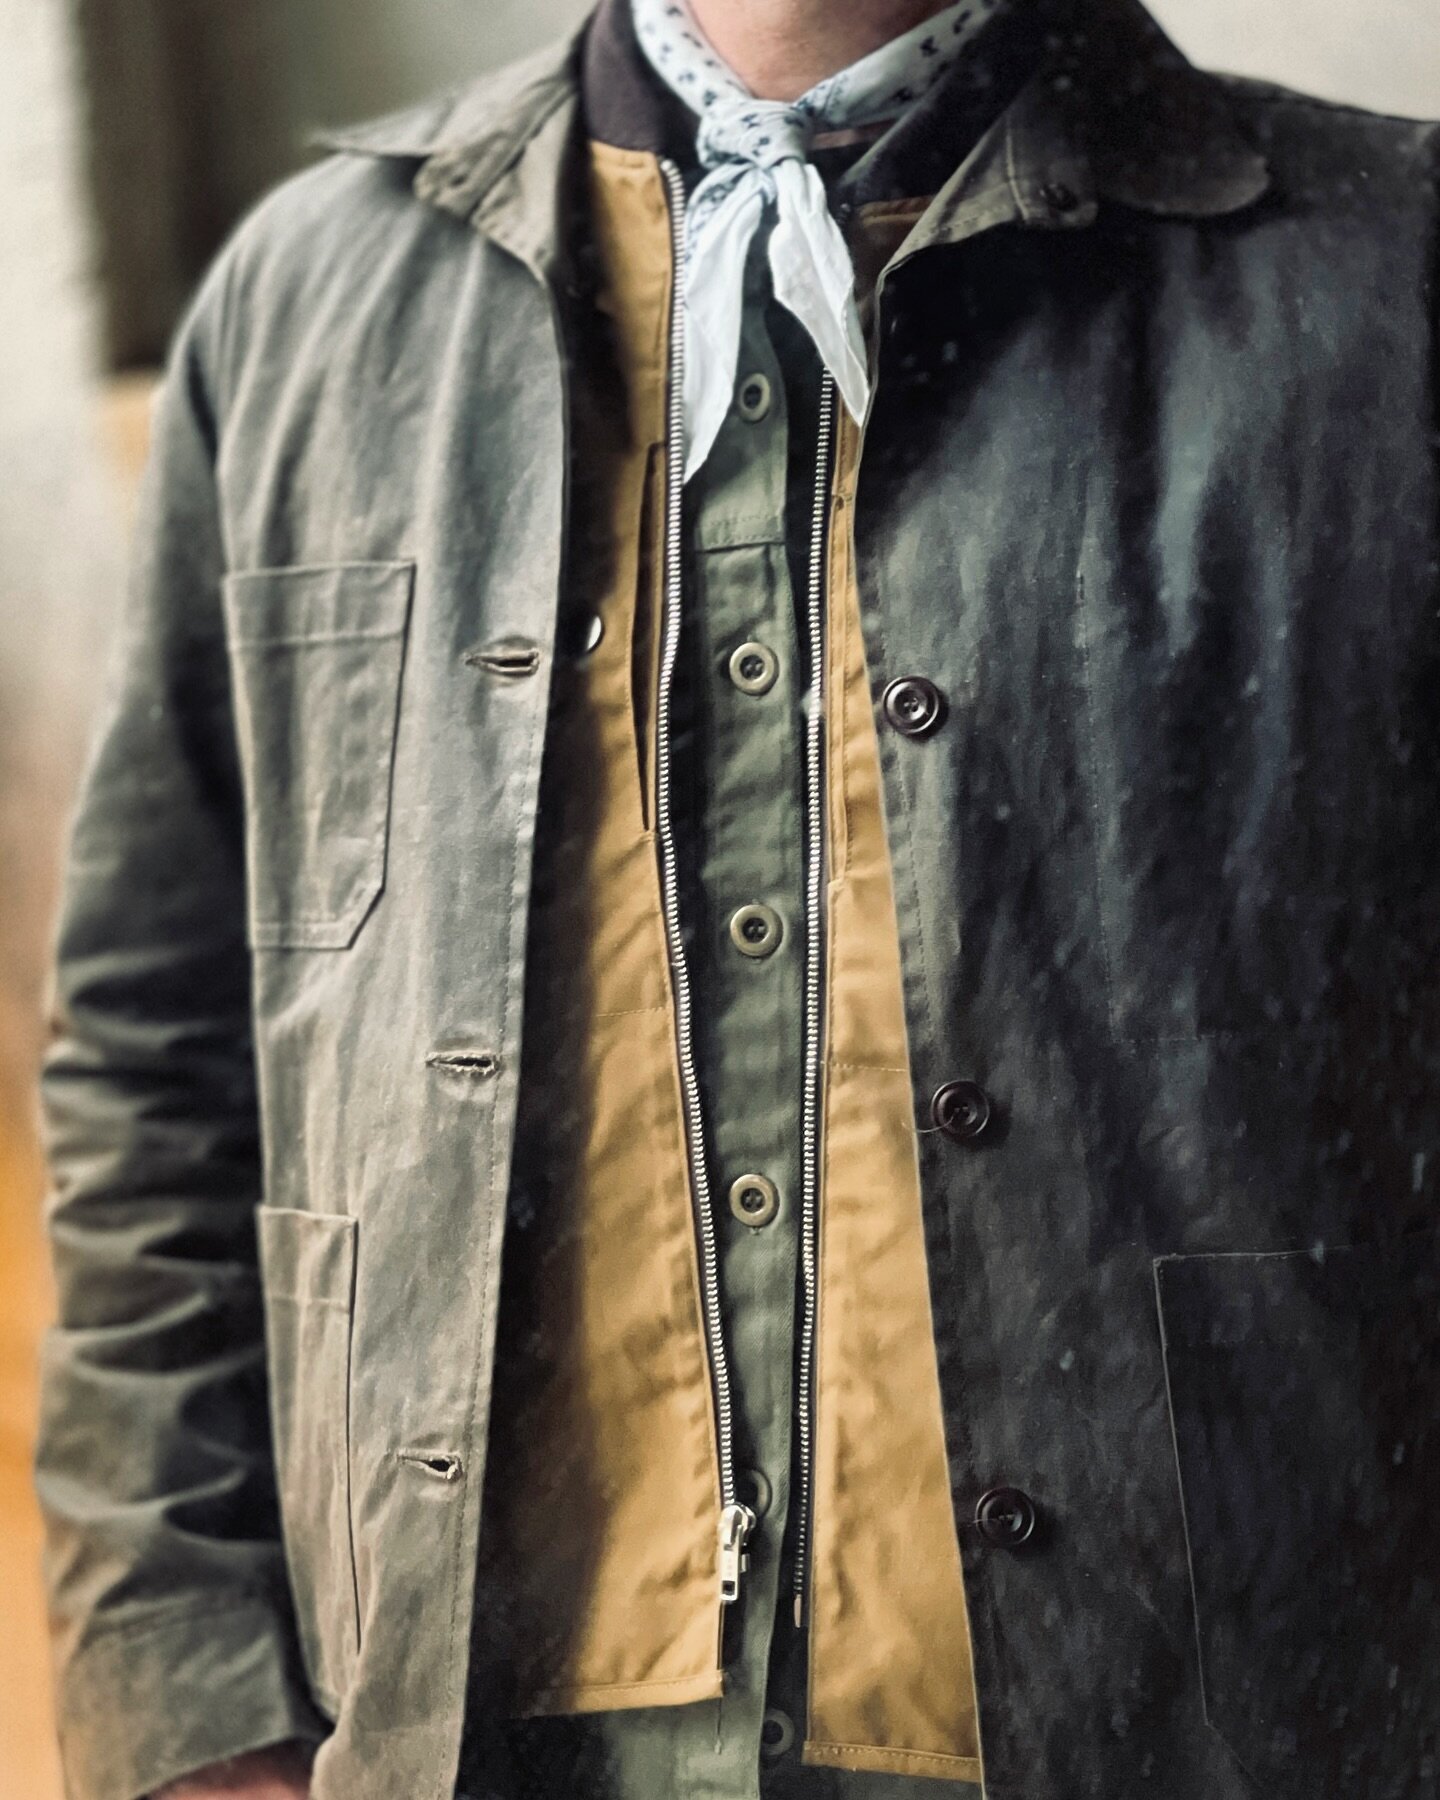 Staying dry is a good look 💚

Antique Wax Chore Coat - 3 colours
Waxed Fabric @halleystevensons 
Corozo Nut Buttons @courtneycobuttonmakers 
Sizes S -5XL

Military &amp; Workwear Style Inspired. 

Performance fabric &amp; construction led.

Classic 